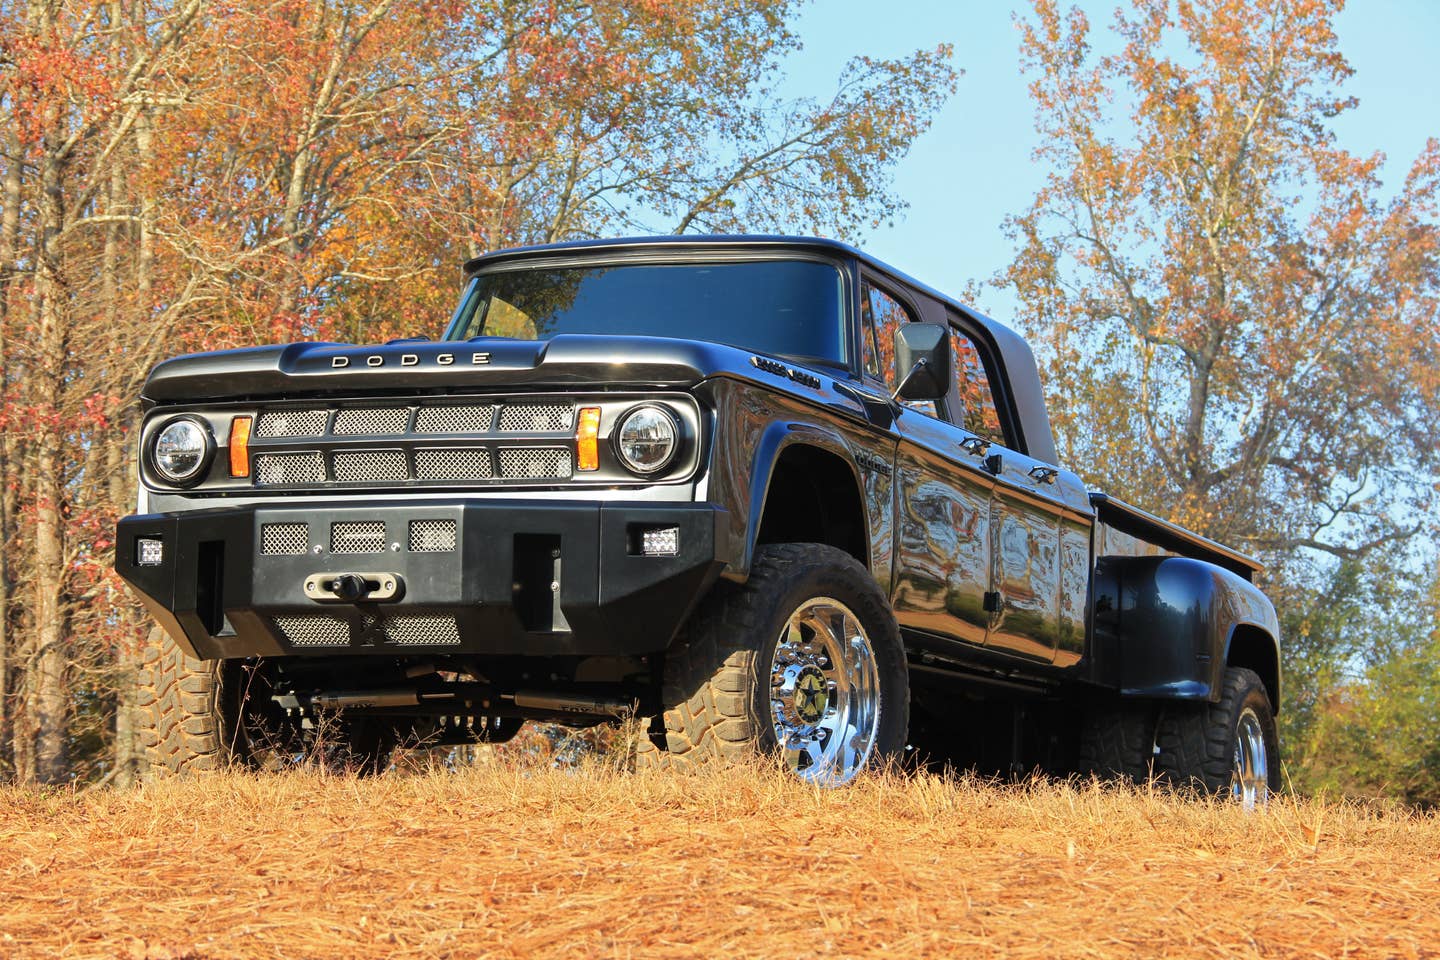 This 1969 Dodge D200 Power Wagon Mega Cab is One-of-a-Kind